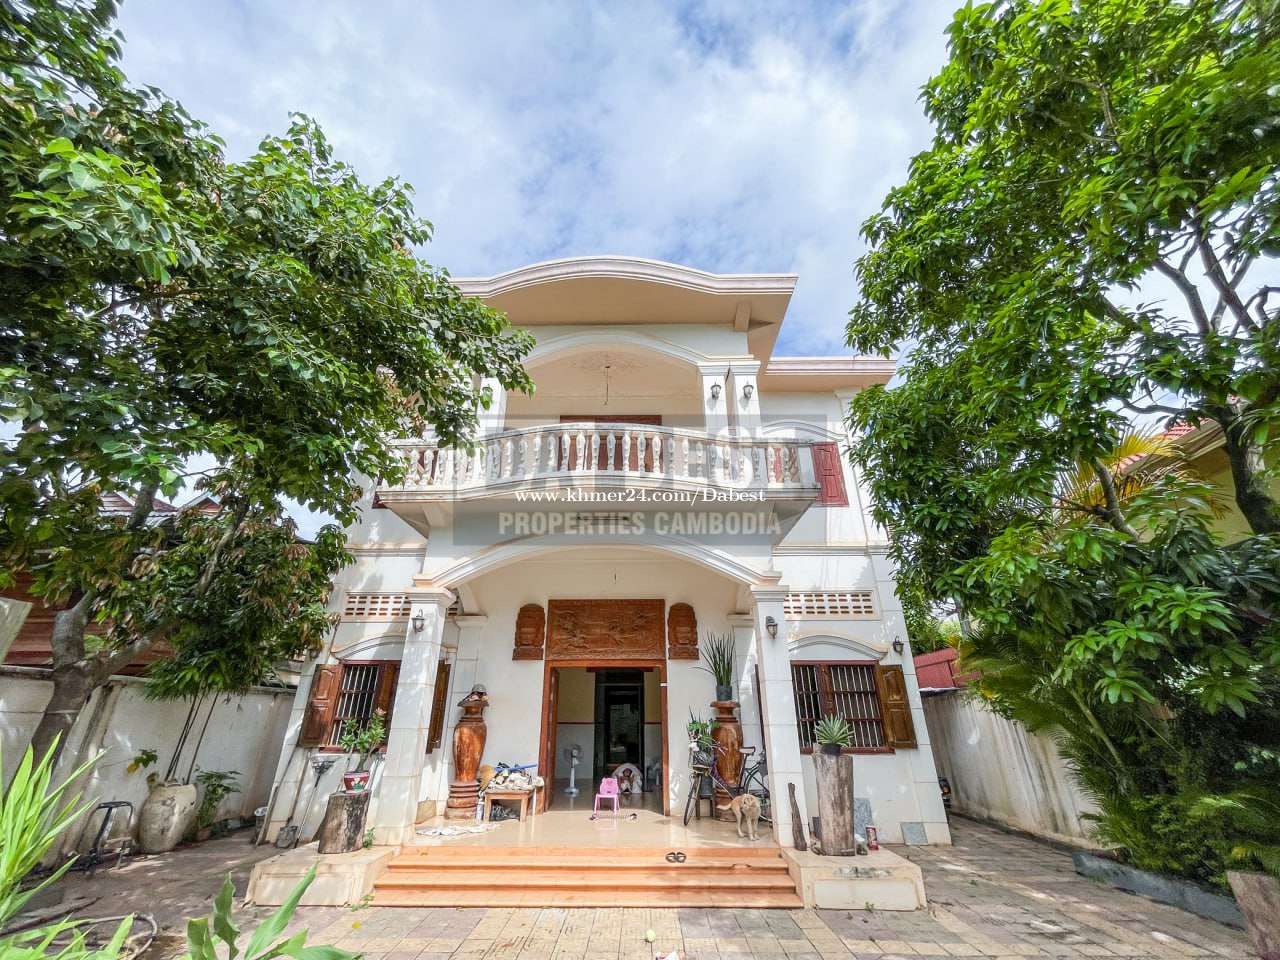 Private House 6 Bedroom For Rent In Siem Reap – Svay Dangkum